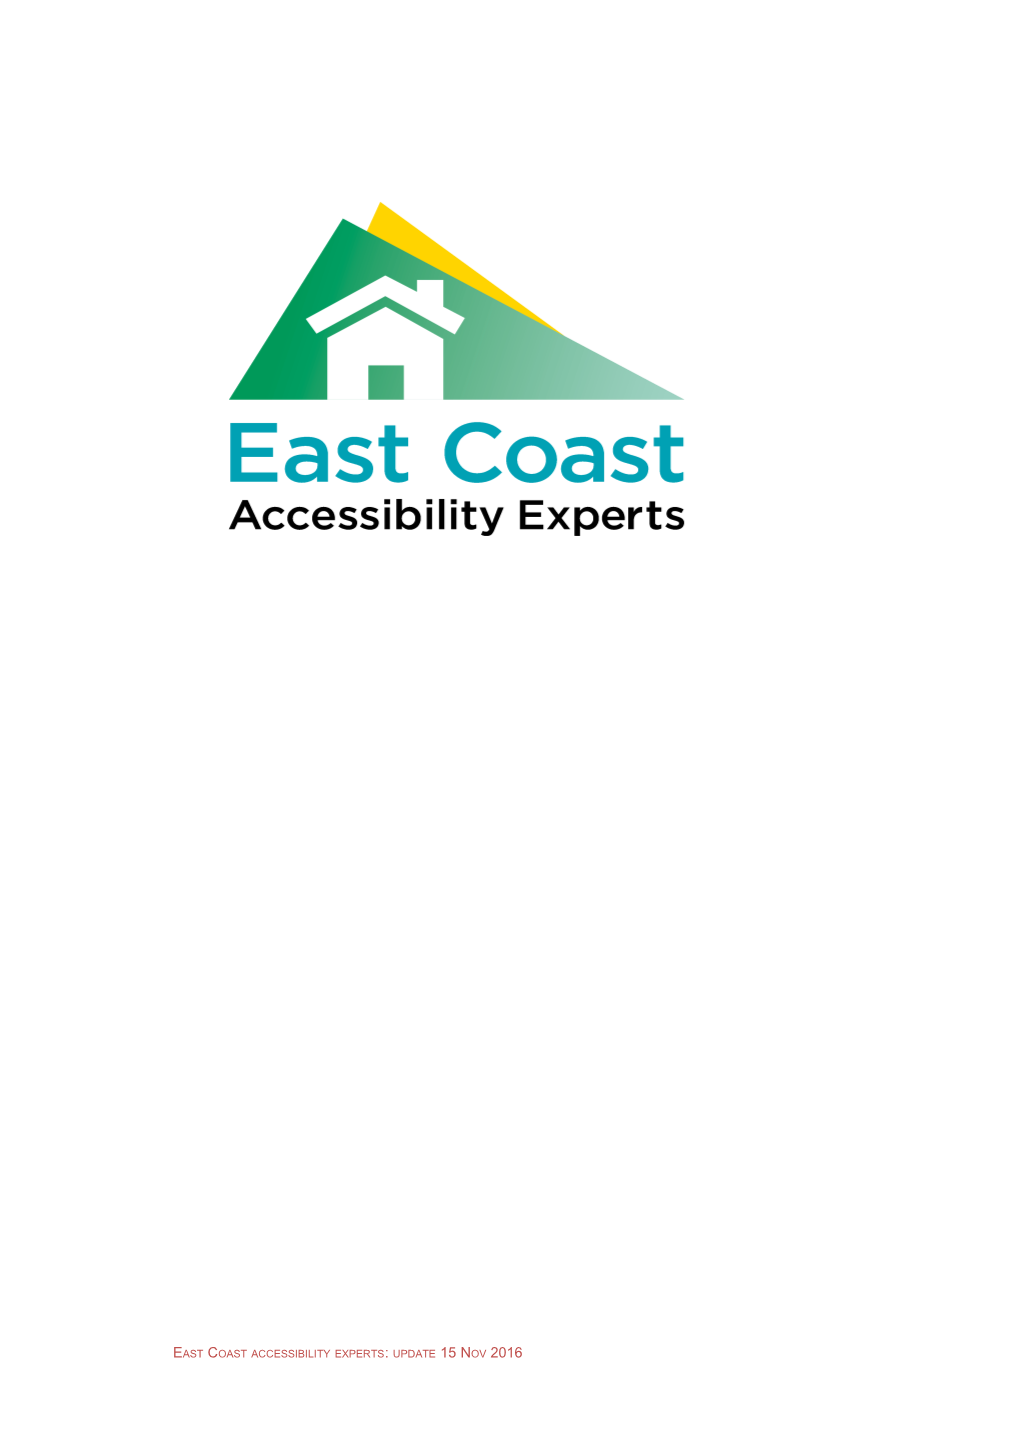 East Coast Accessibility Experts: Update 15 Nov 2016